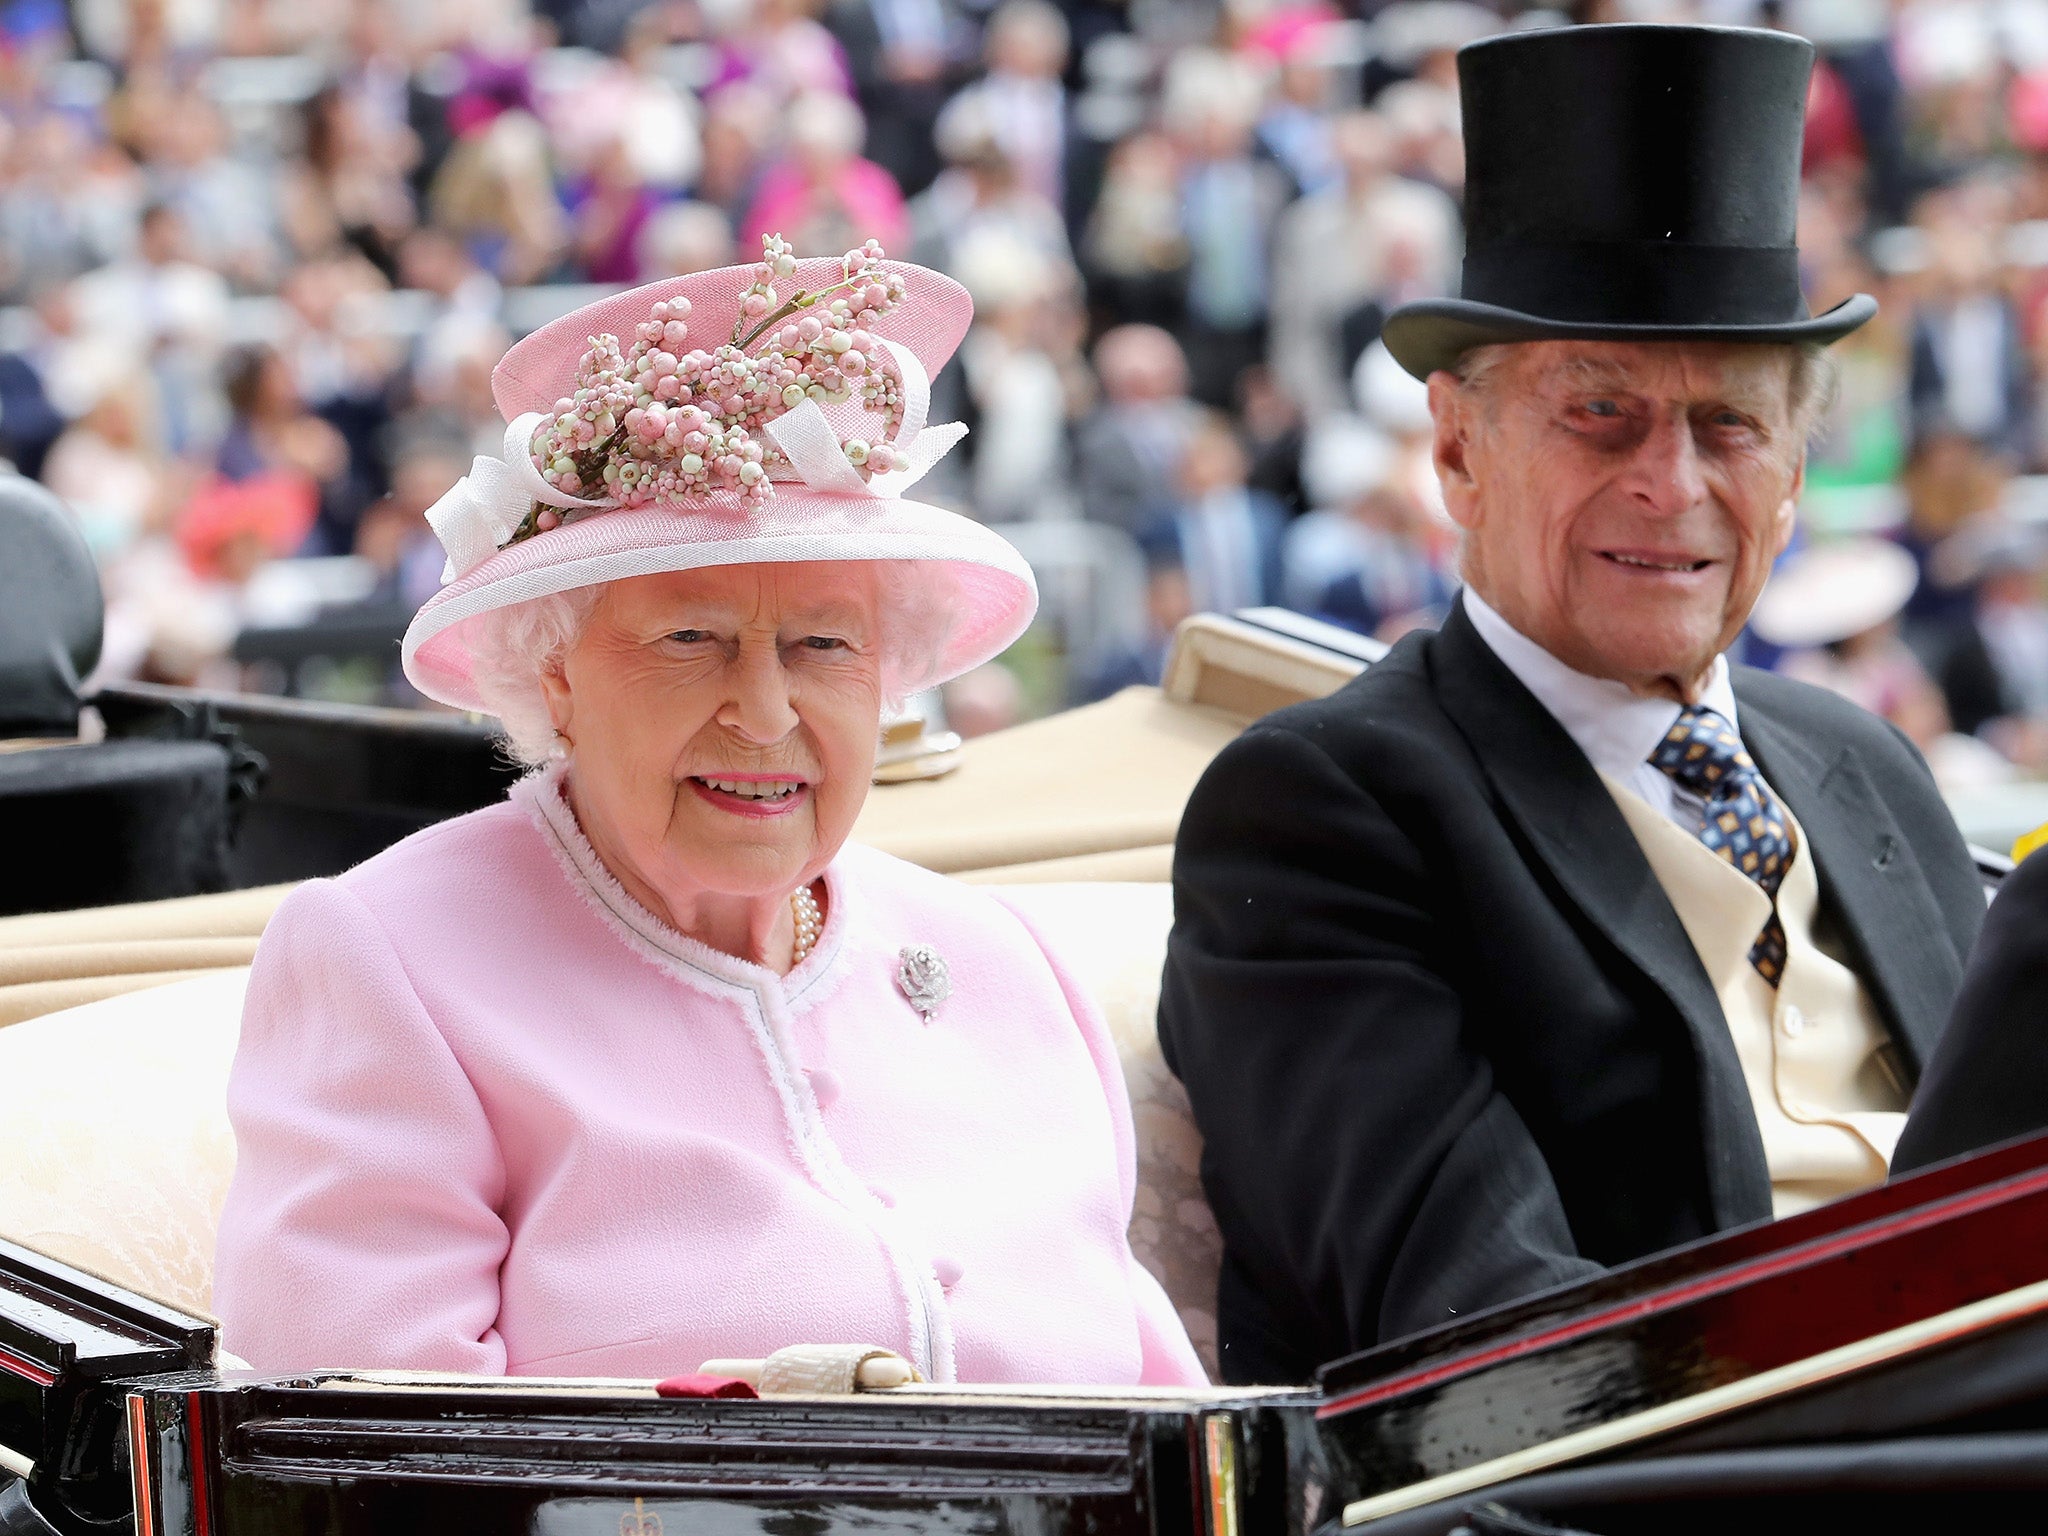 The Queen and Prince Philip at Royal Ascot